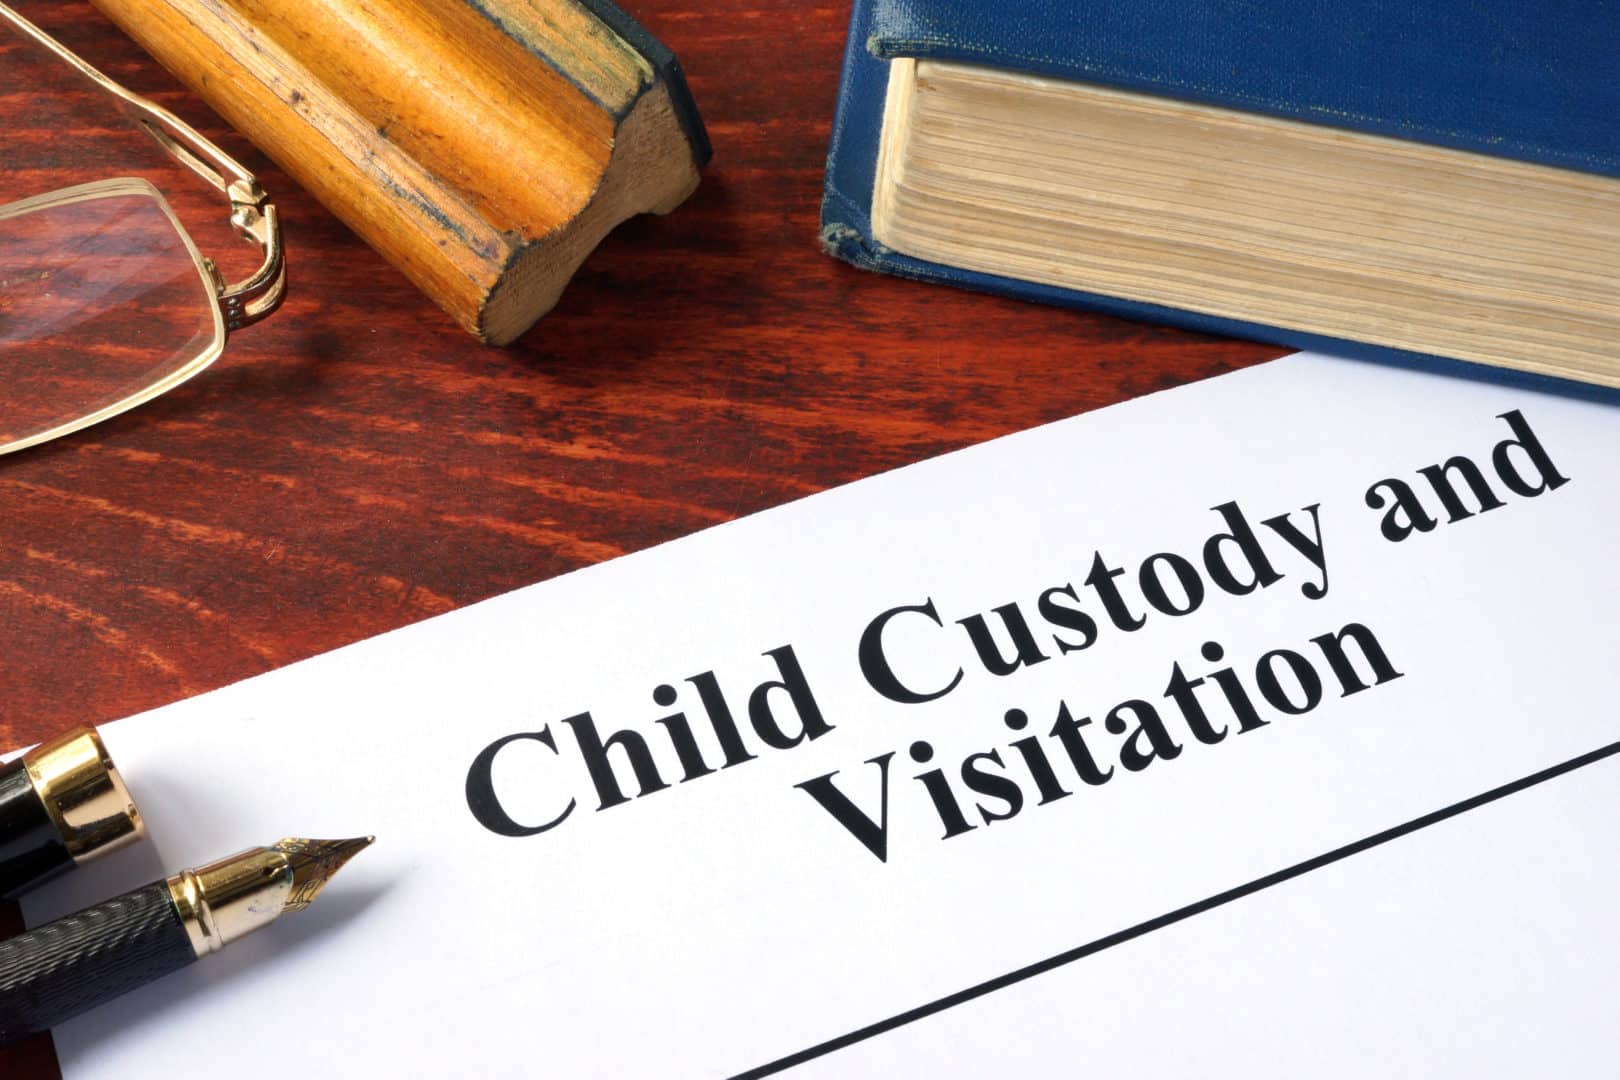 paper with child custody and visitation with a book, pen, and glasses on a wooden table